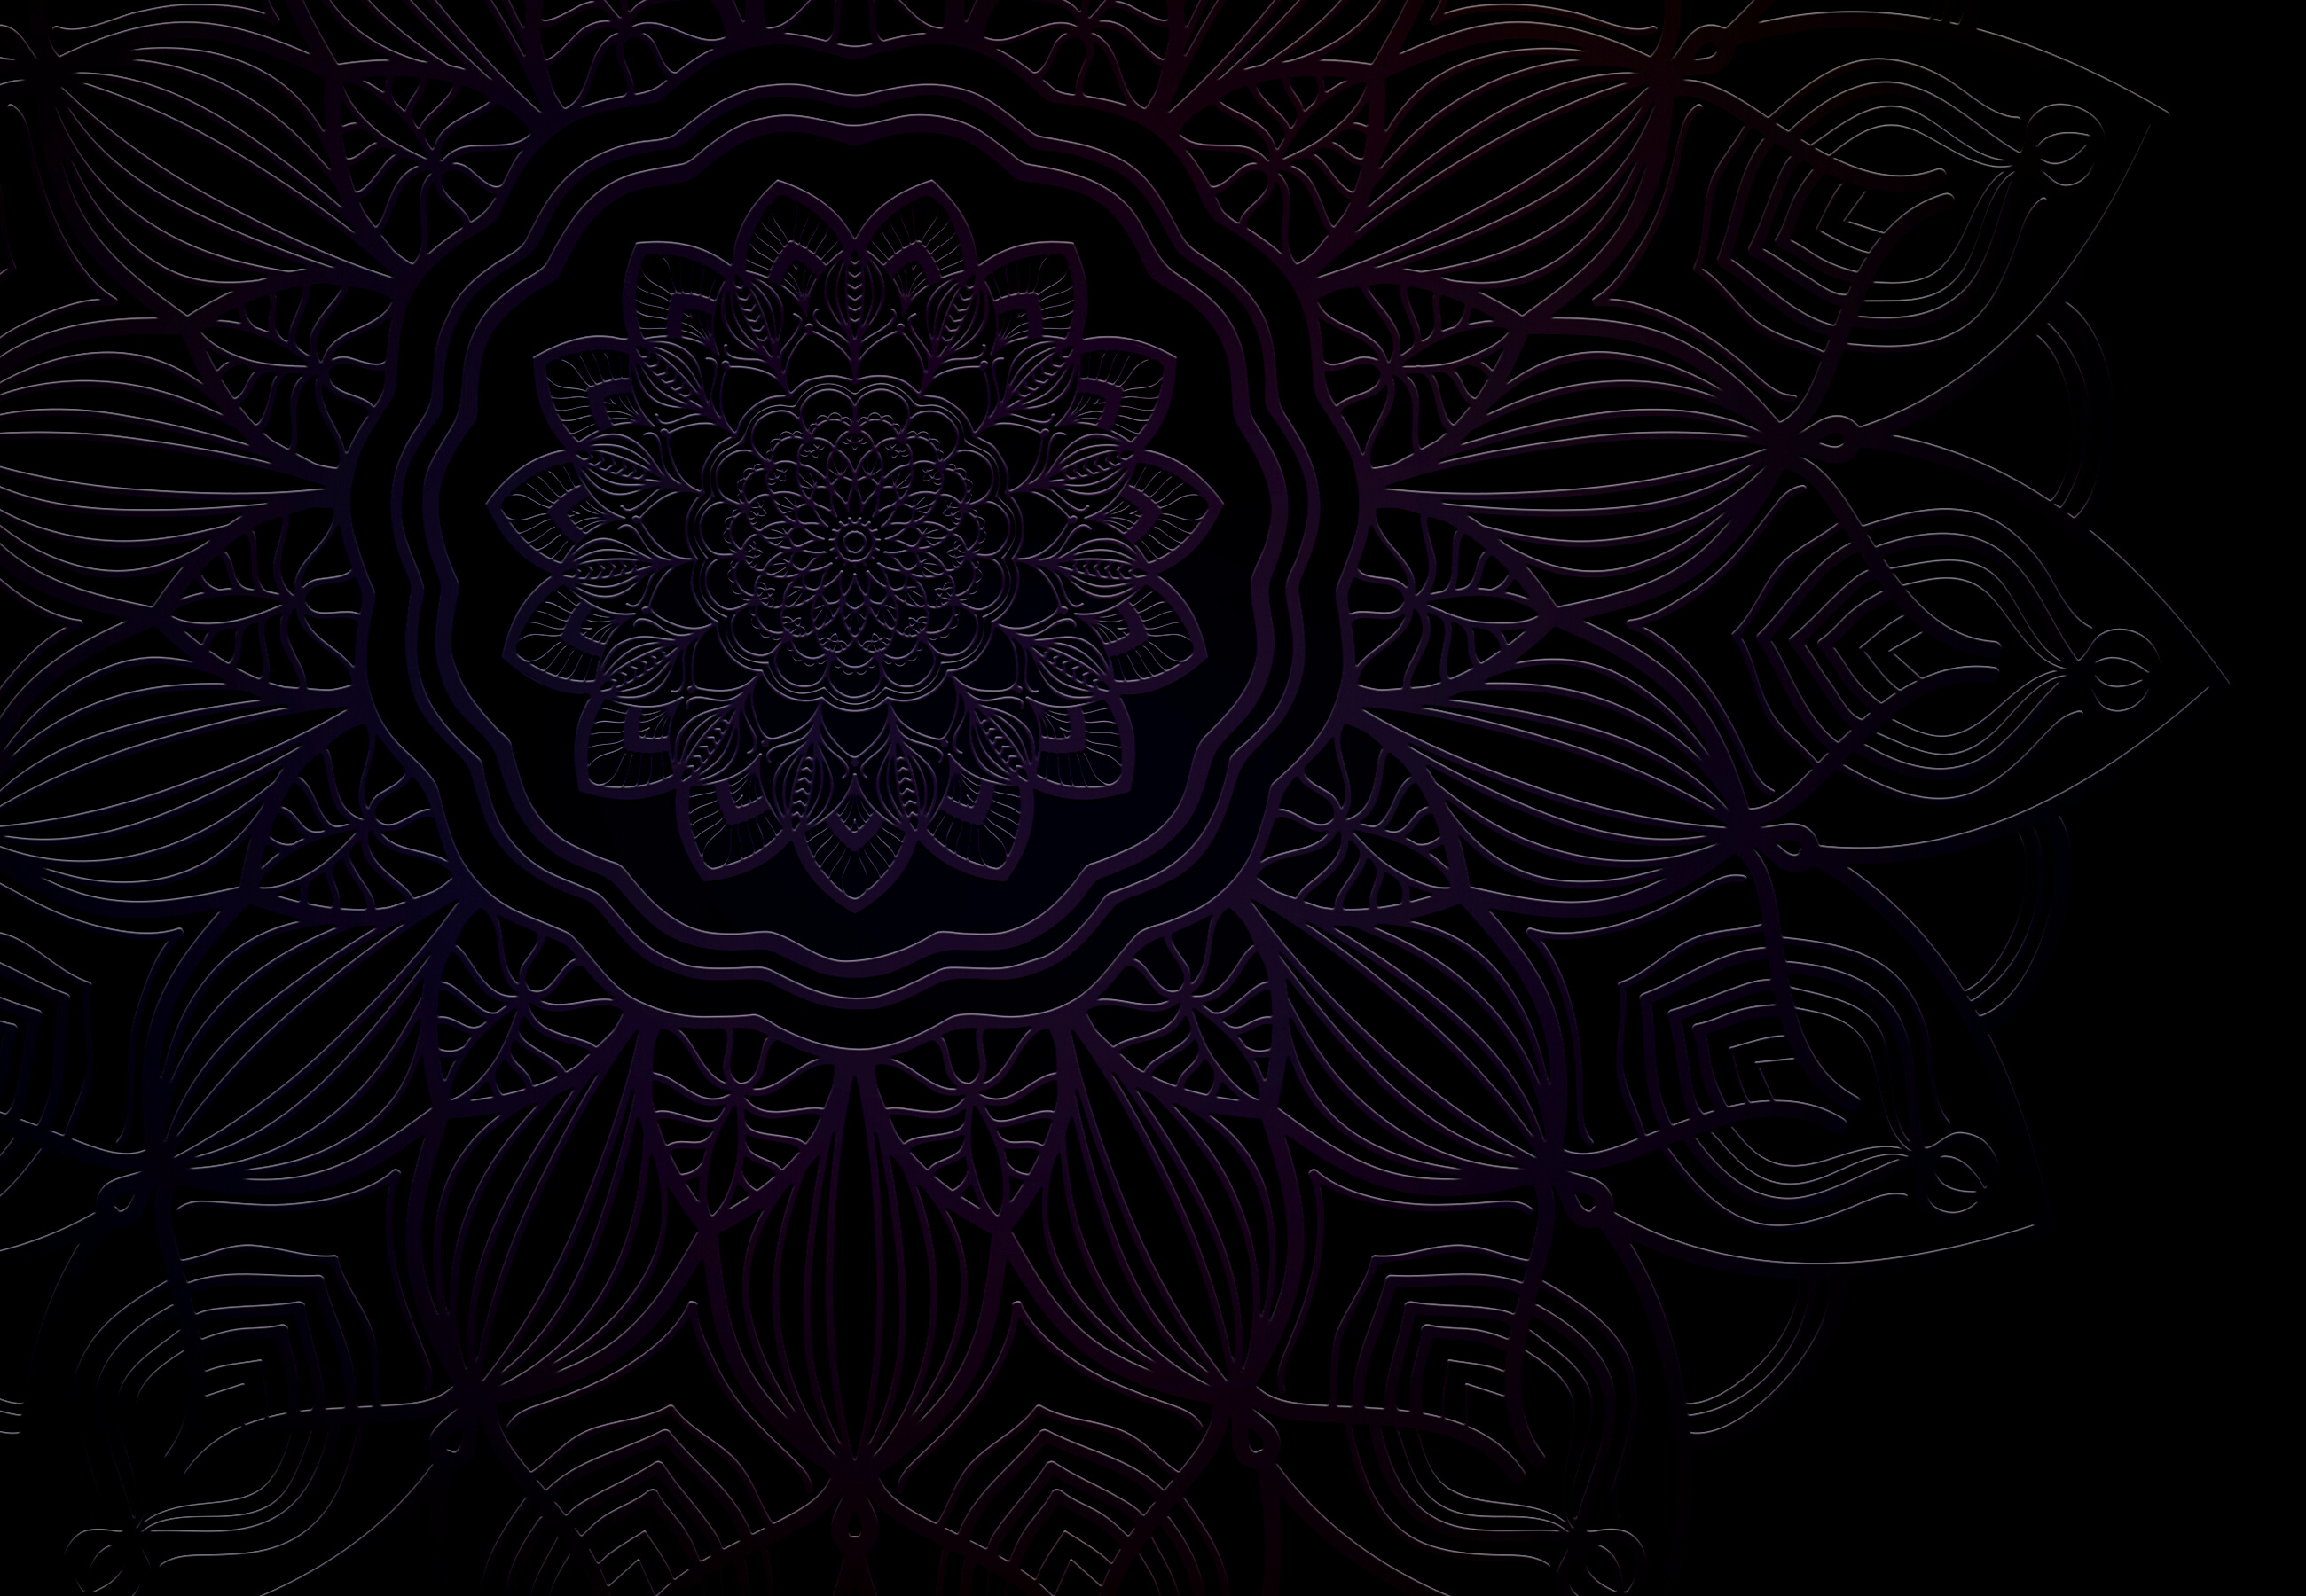 Abstract mandala graphic background